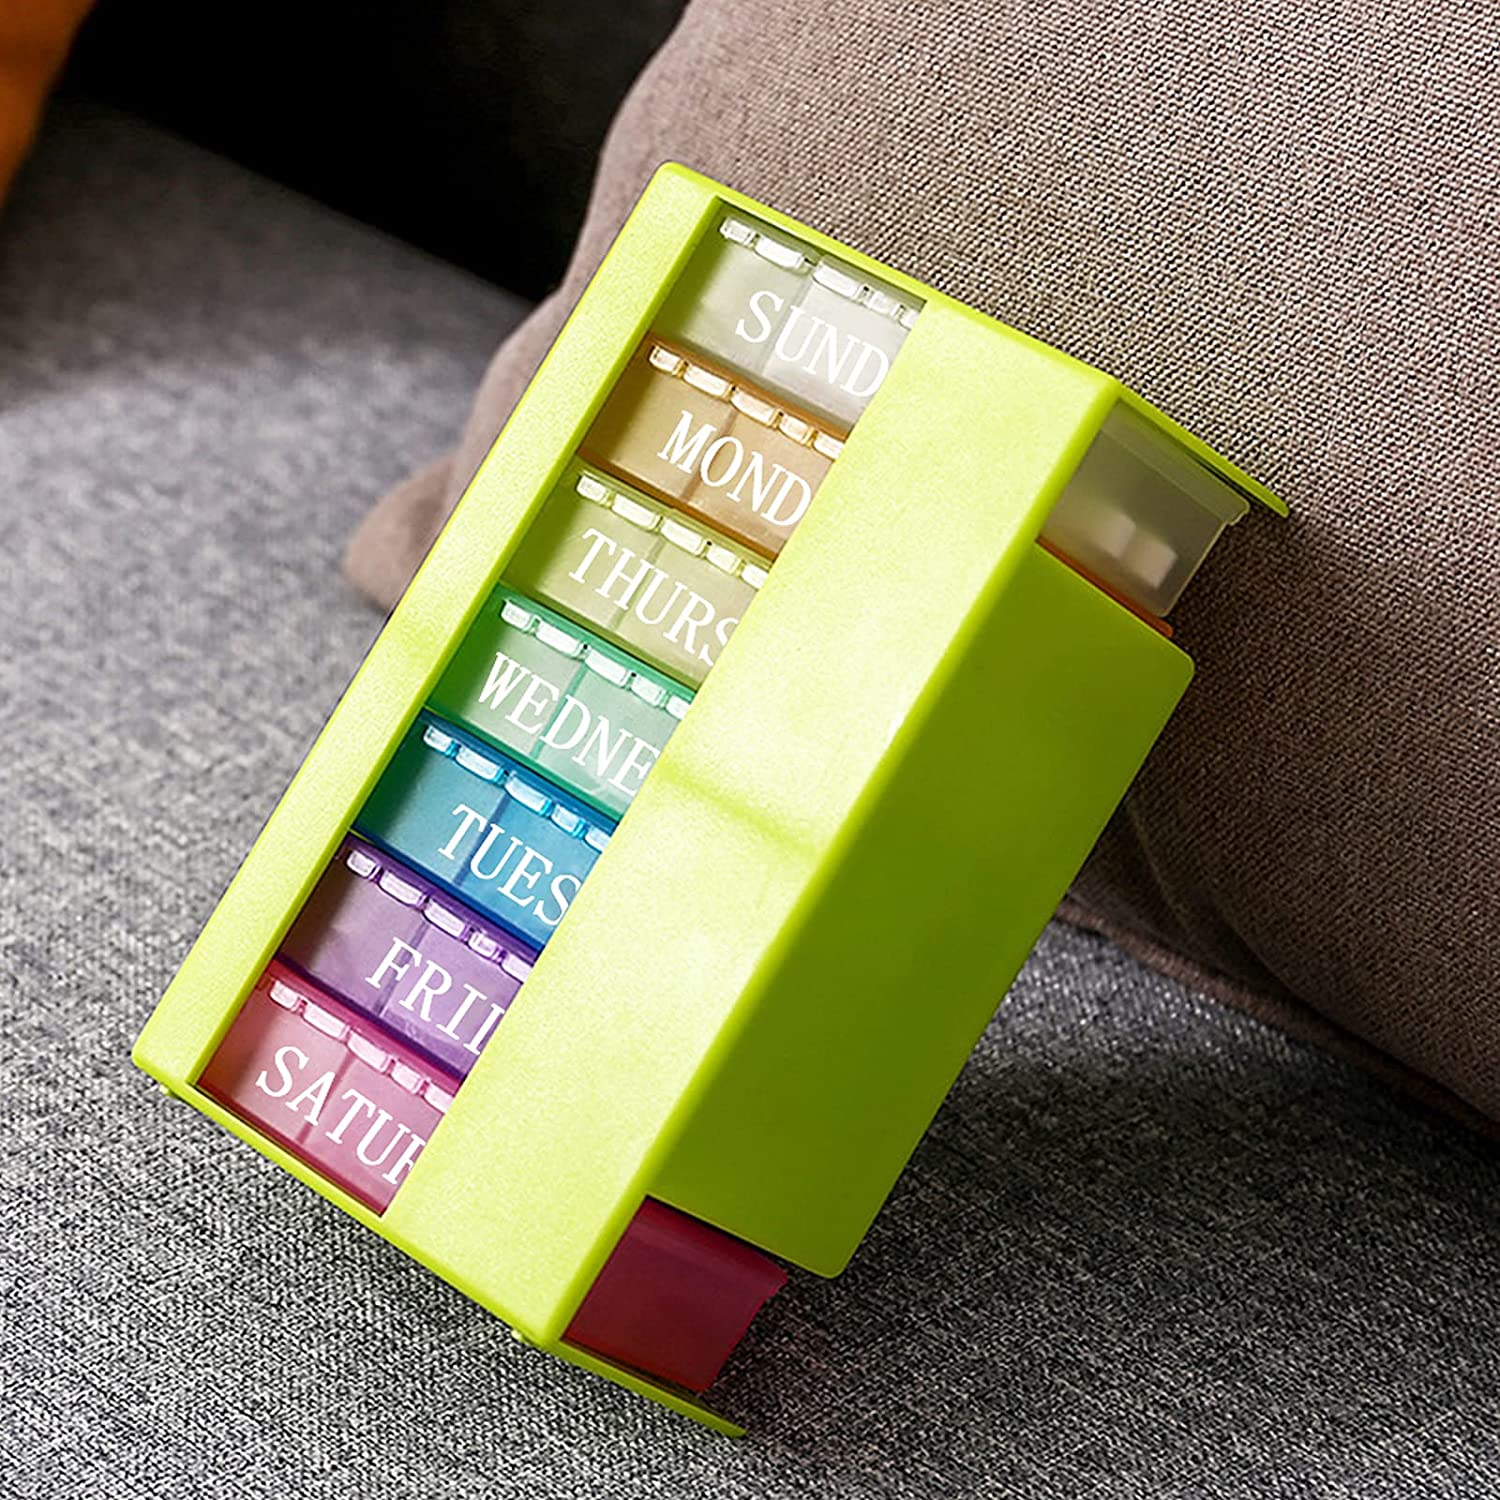 Stackable Pocket Daily 3 Times a Day Pill Organizer